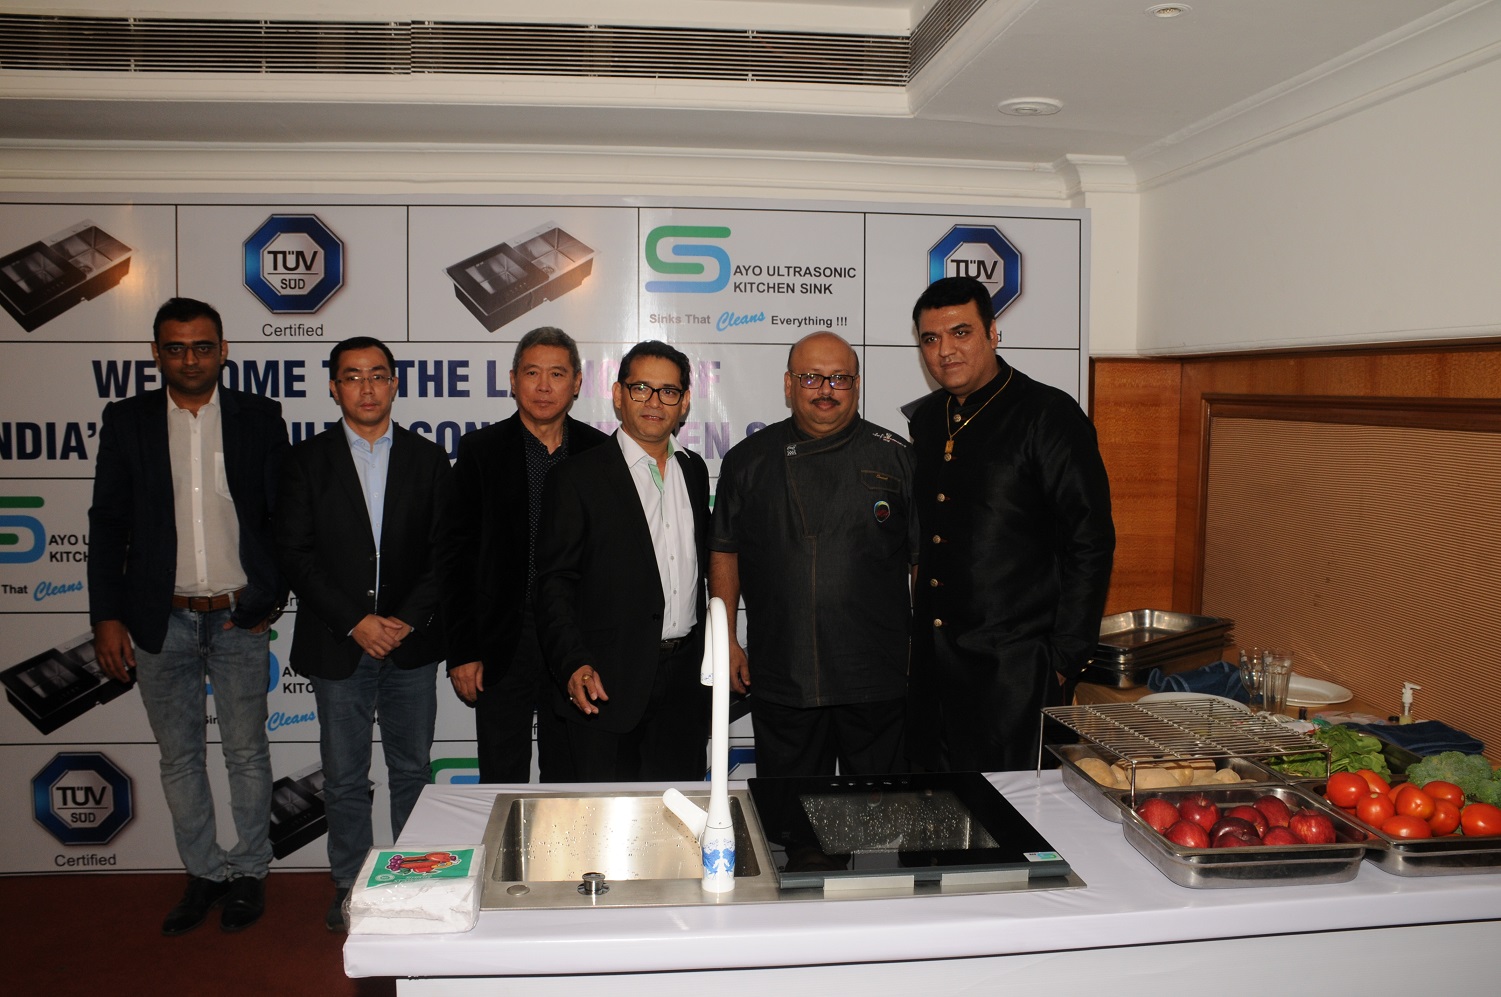 Sayo Ultrasonic Kitchen Sink Launched For First Time In India